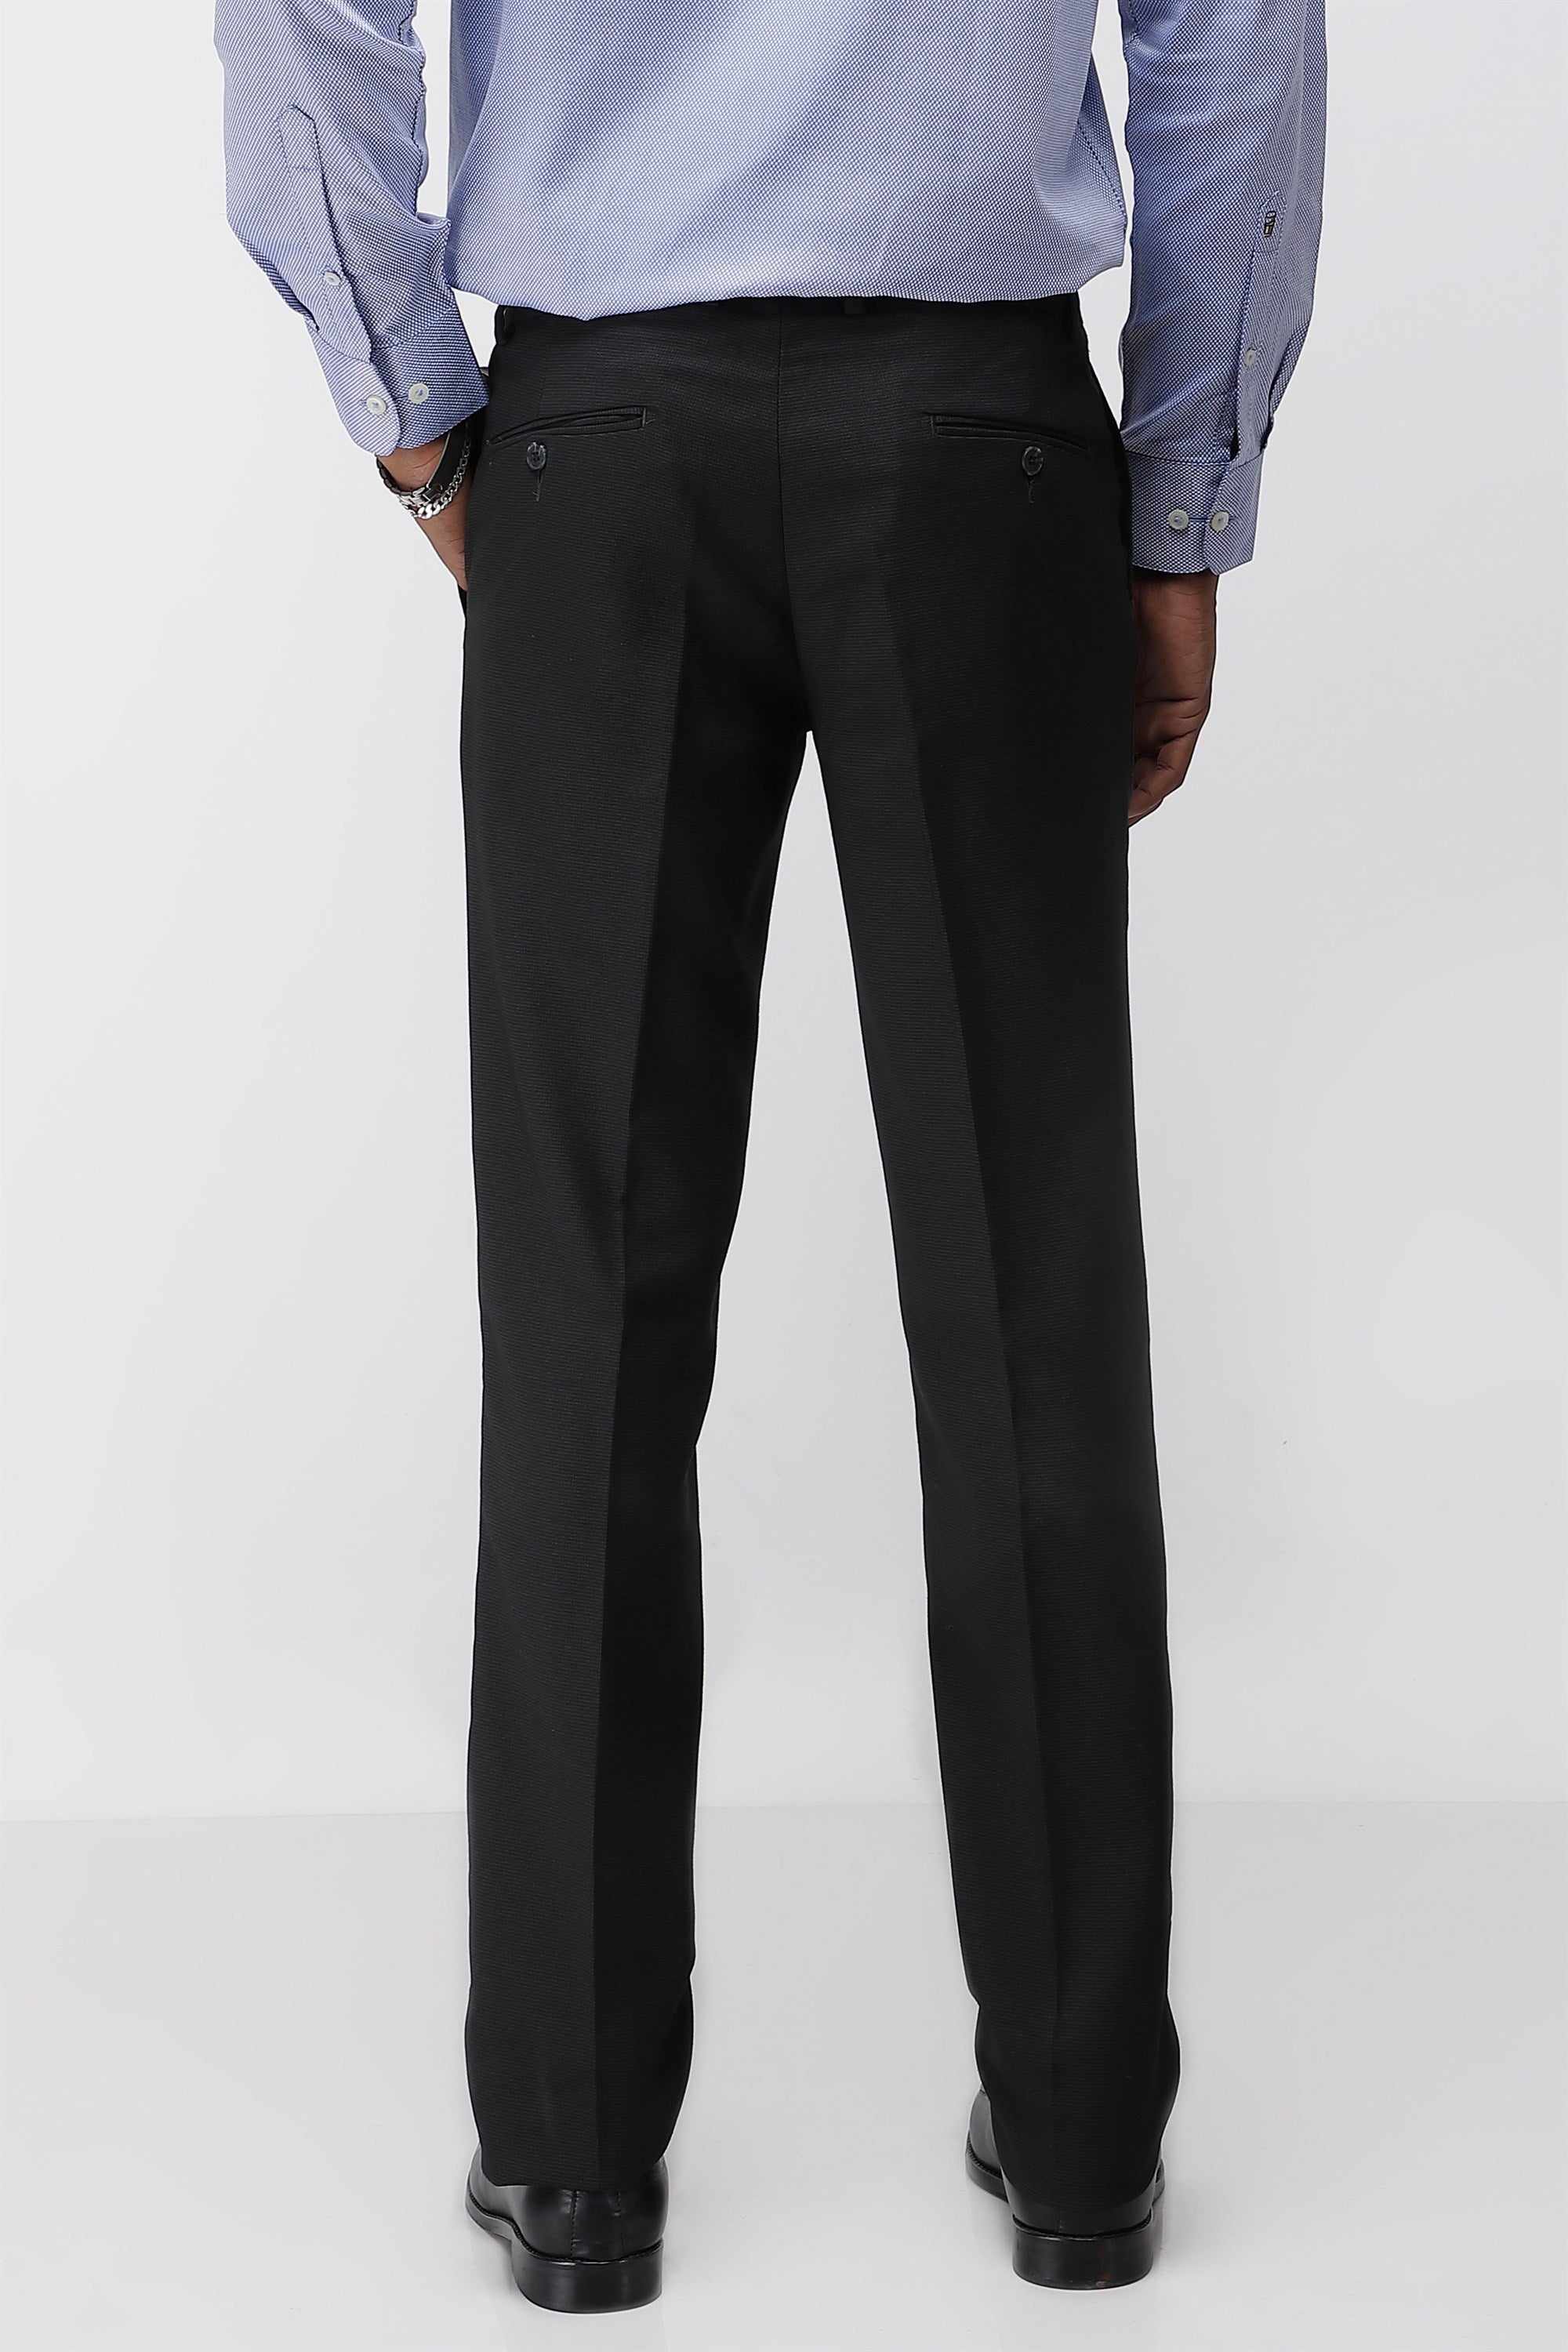 T the brand Stretch Formal Flat Textured Trouser - Black